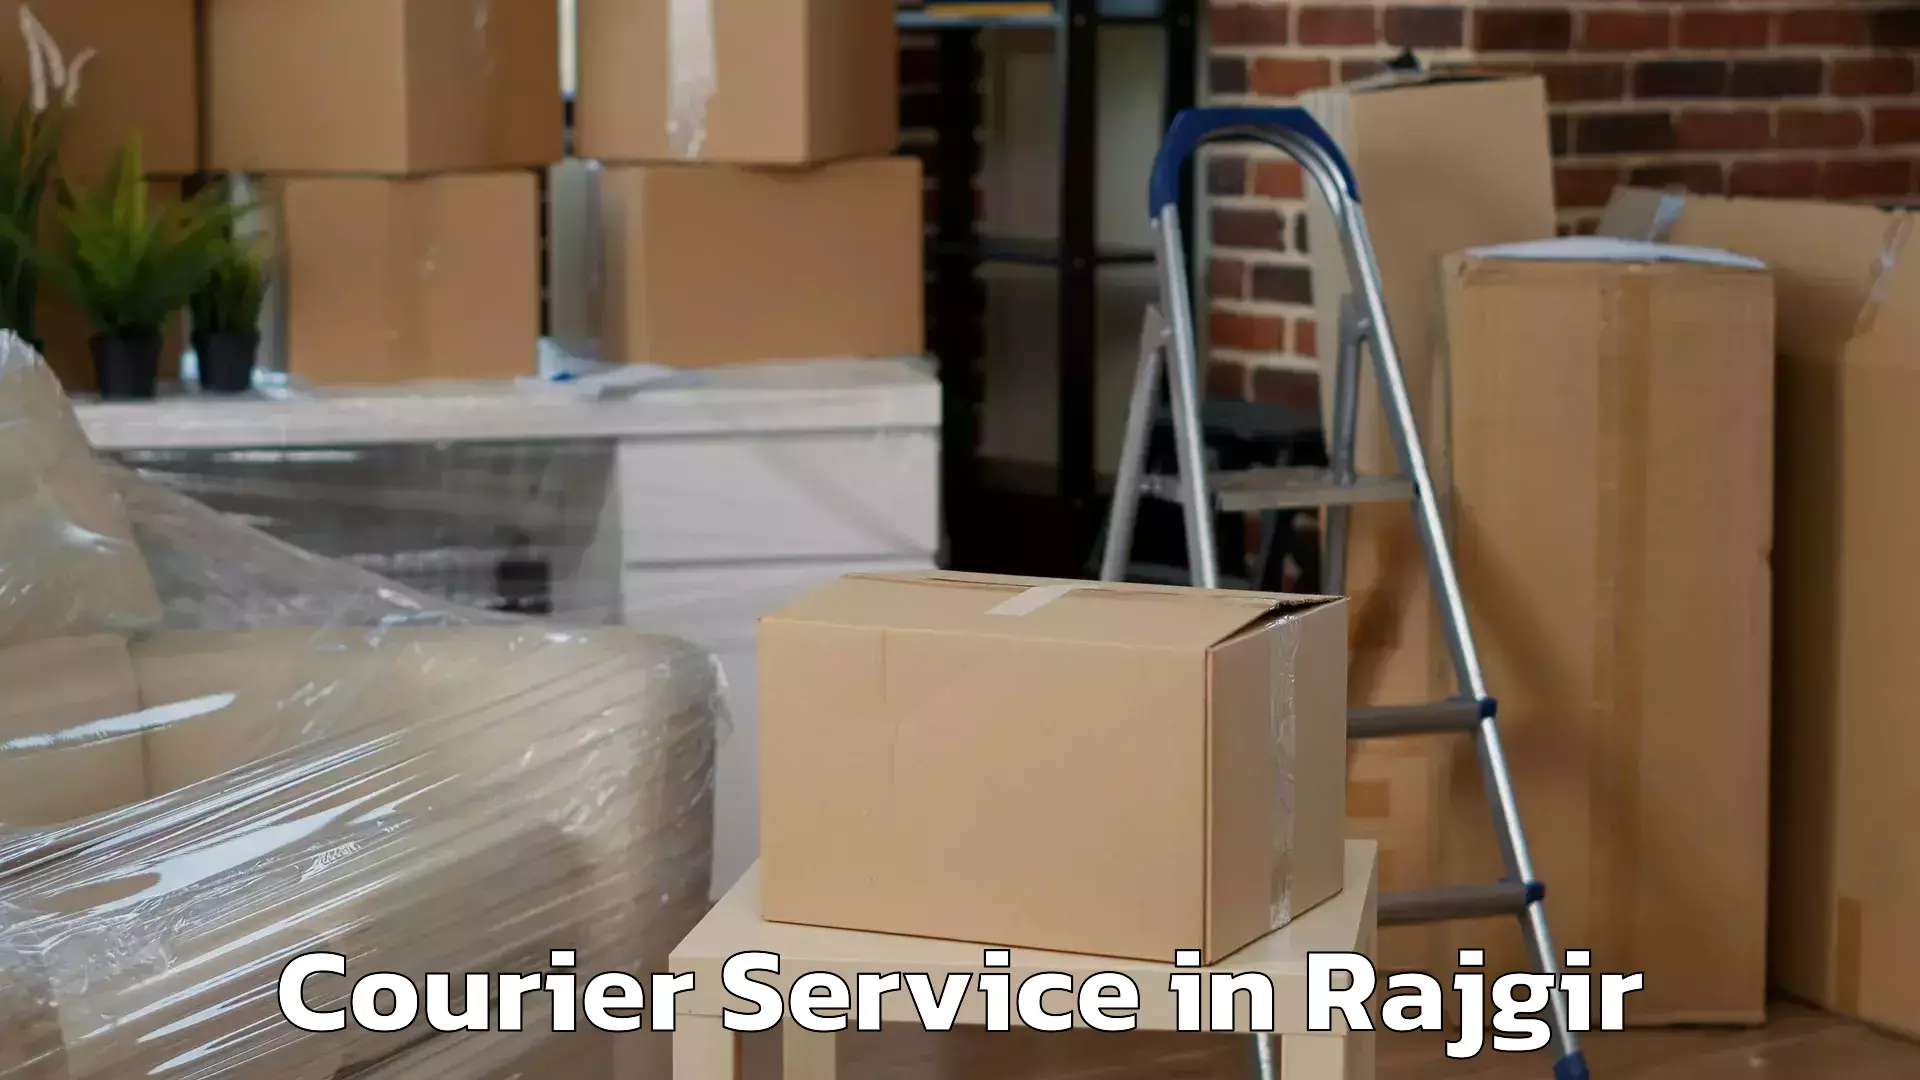 Cargo delivery service in Rajgir